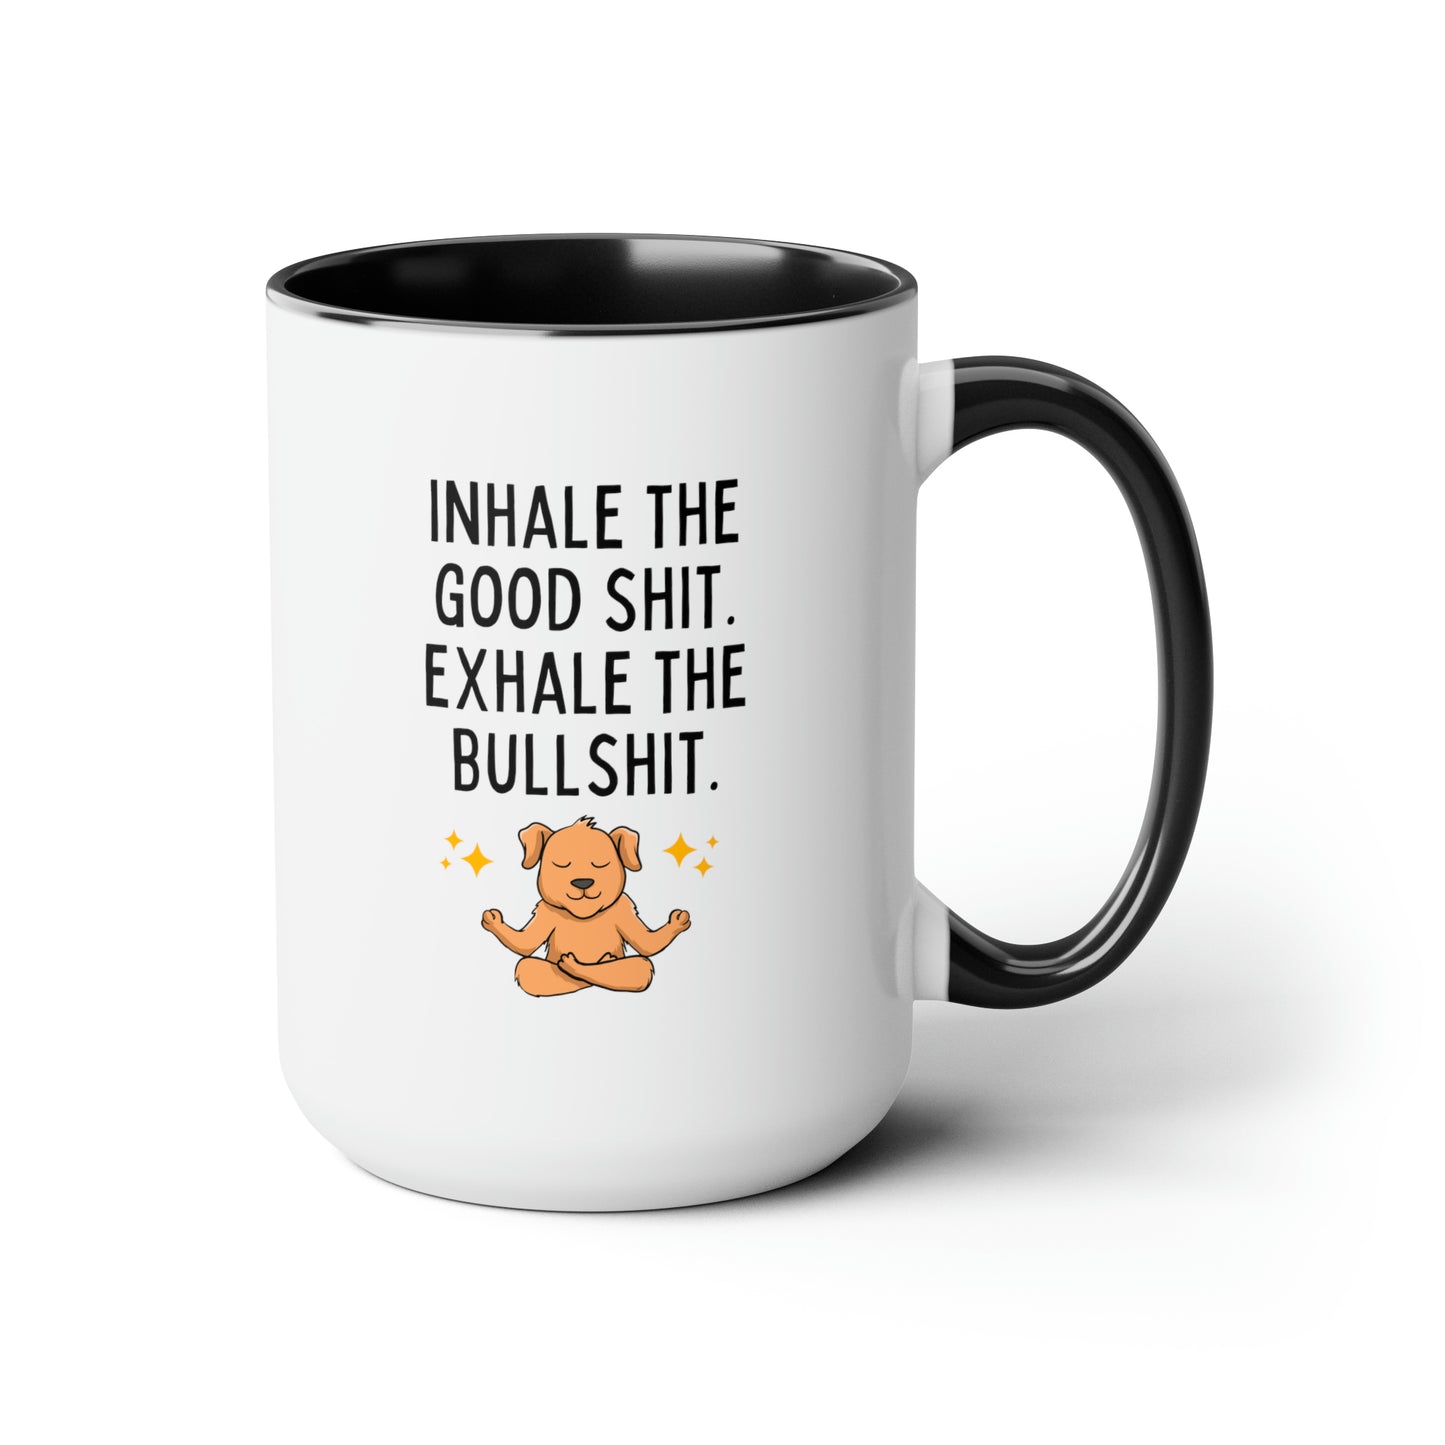 Inhale the Good Shit Exhale the Bullshit 15oz white with black accent funny large coffee mug gift for dog yoga lover fur mom BS cuss sarcastic curse cup waveywares wavey wares wavywares wavy wares